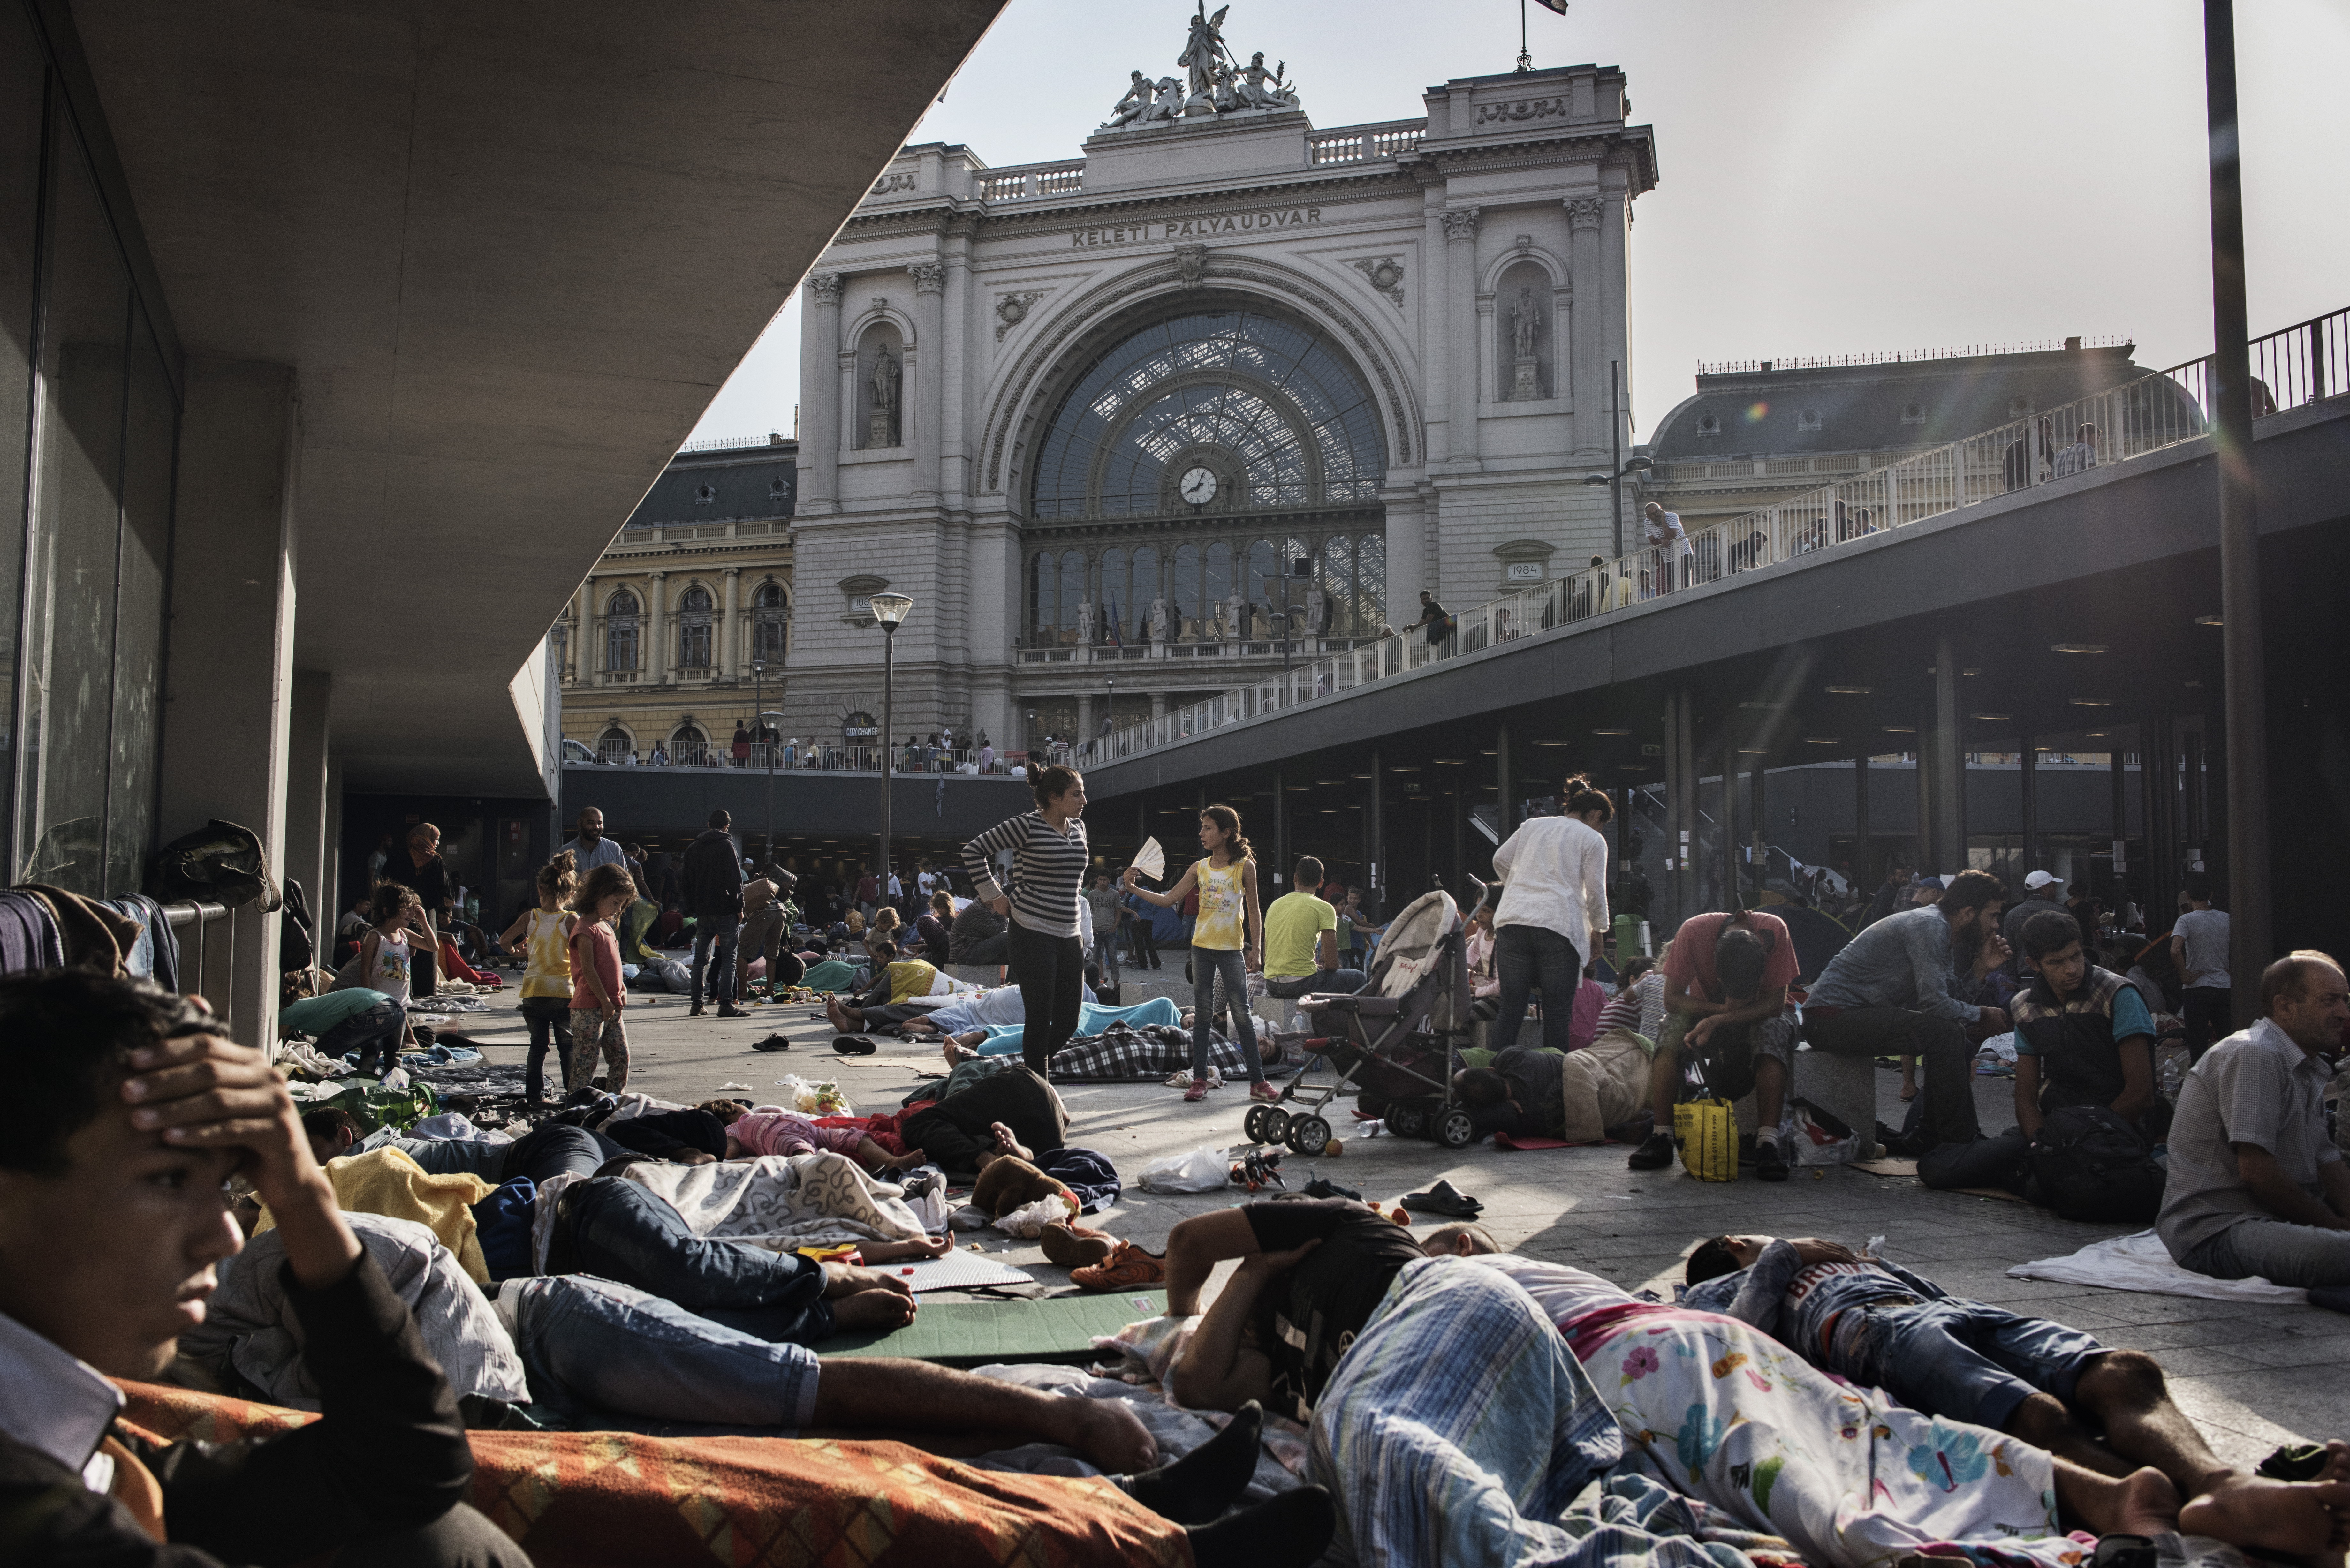 Dozens of refugee families, mostly from Syria, camped near the Keleti train station in Budapest, Hungary on Sept. 2, 2015.